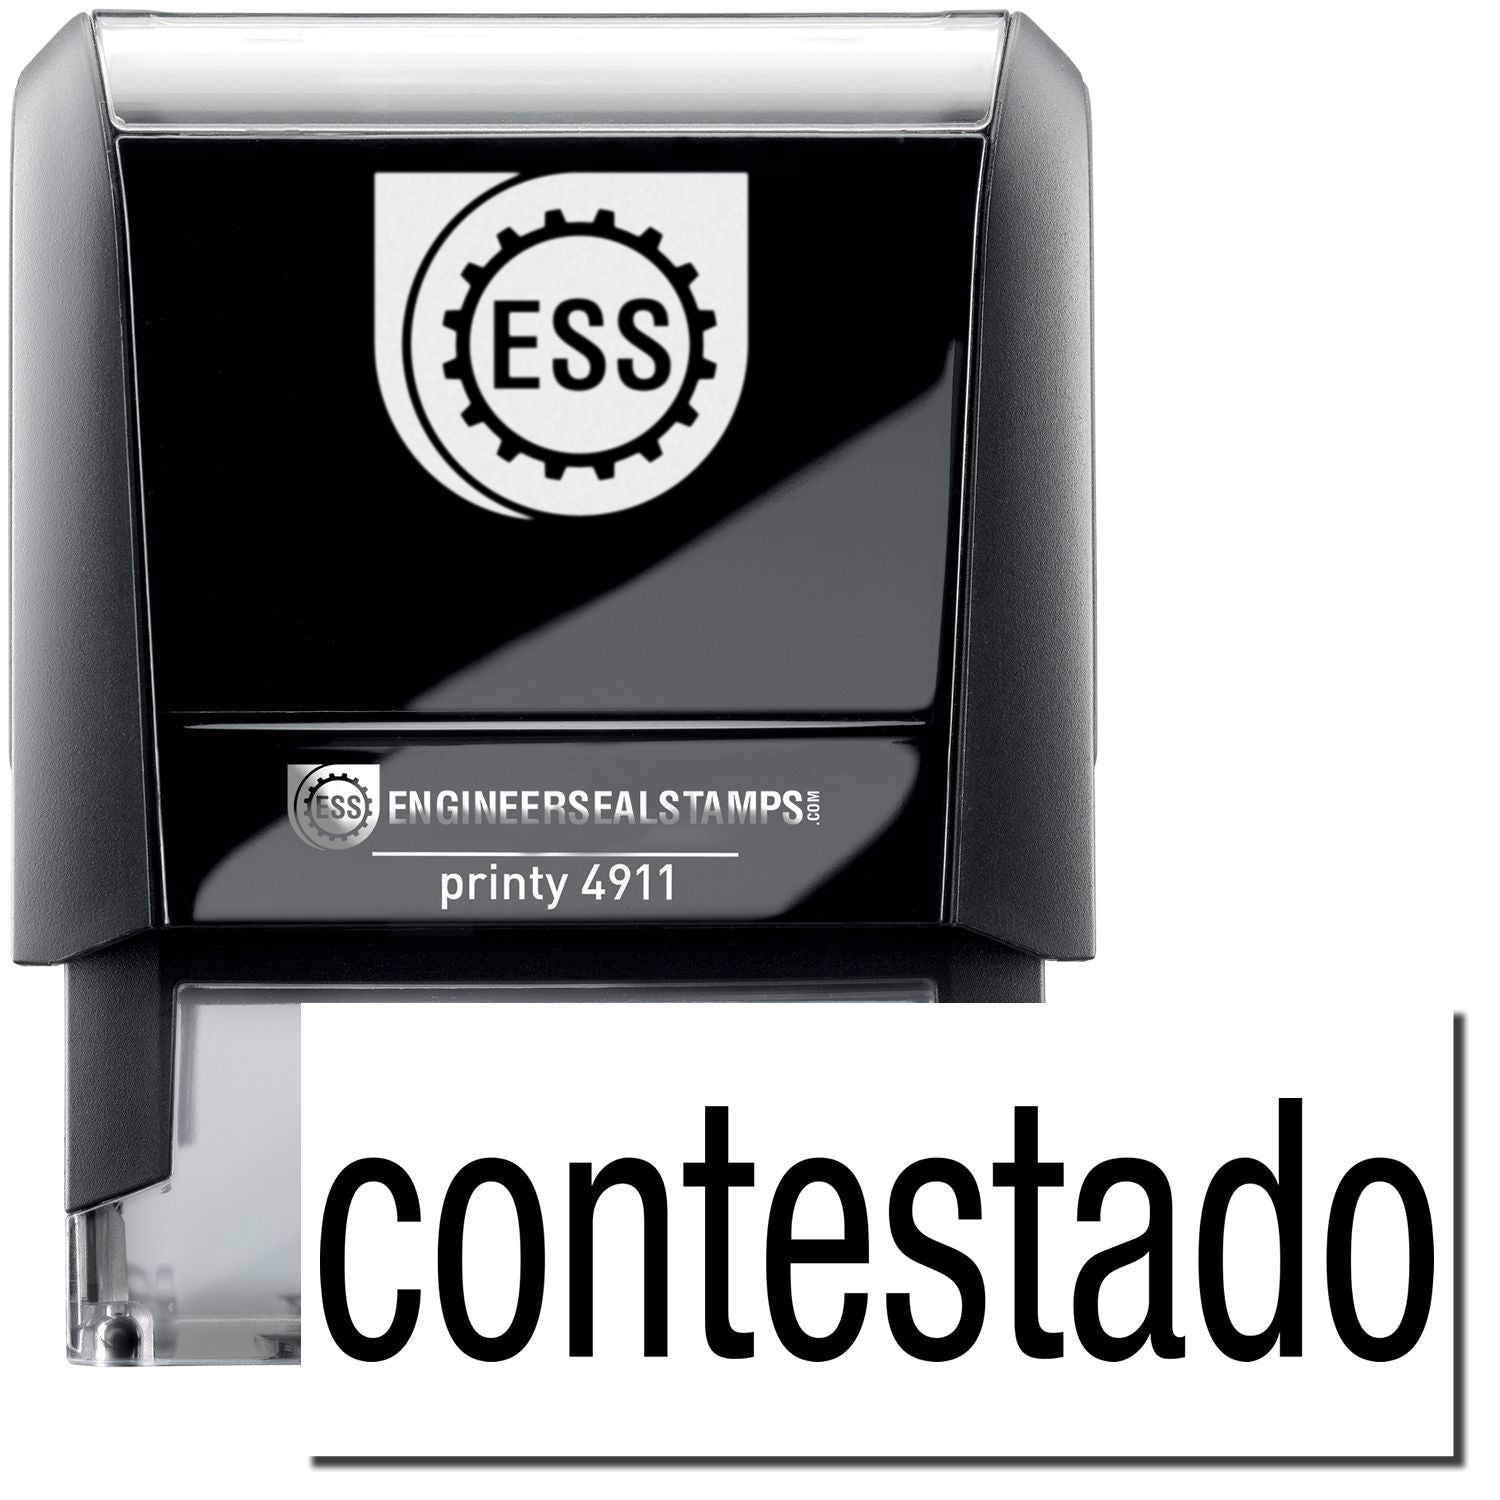 A self-inking stamp with a stamped image showing how the text "contestado" is displayed after stamping.